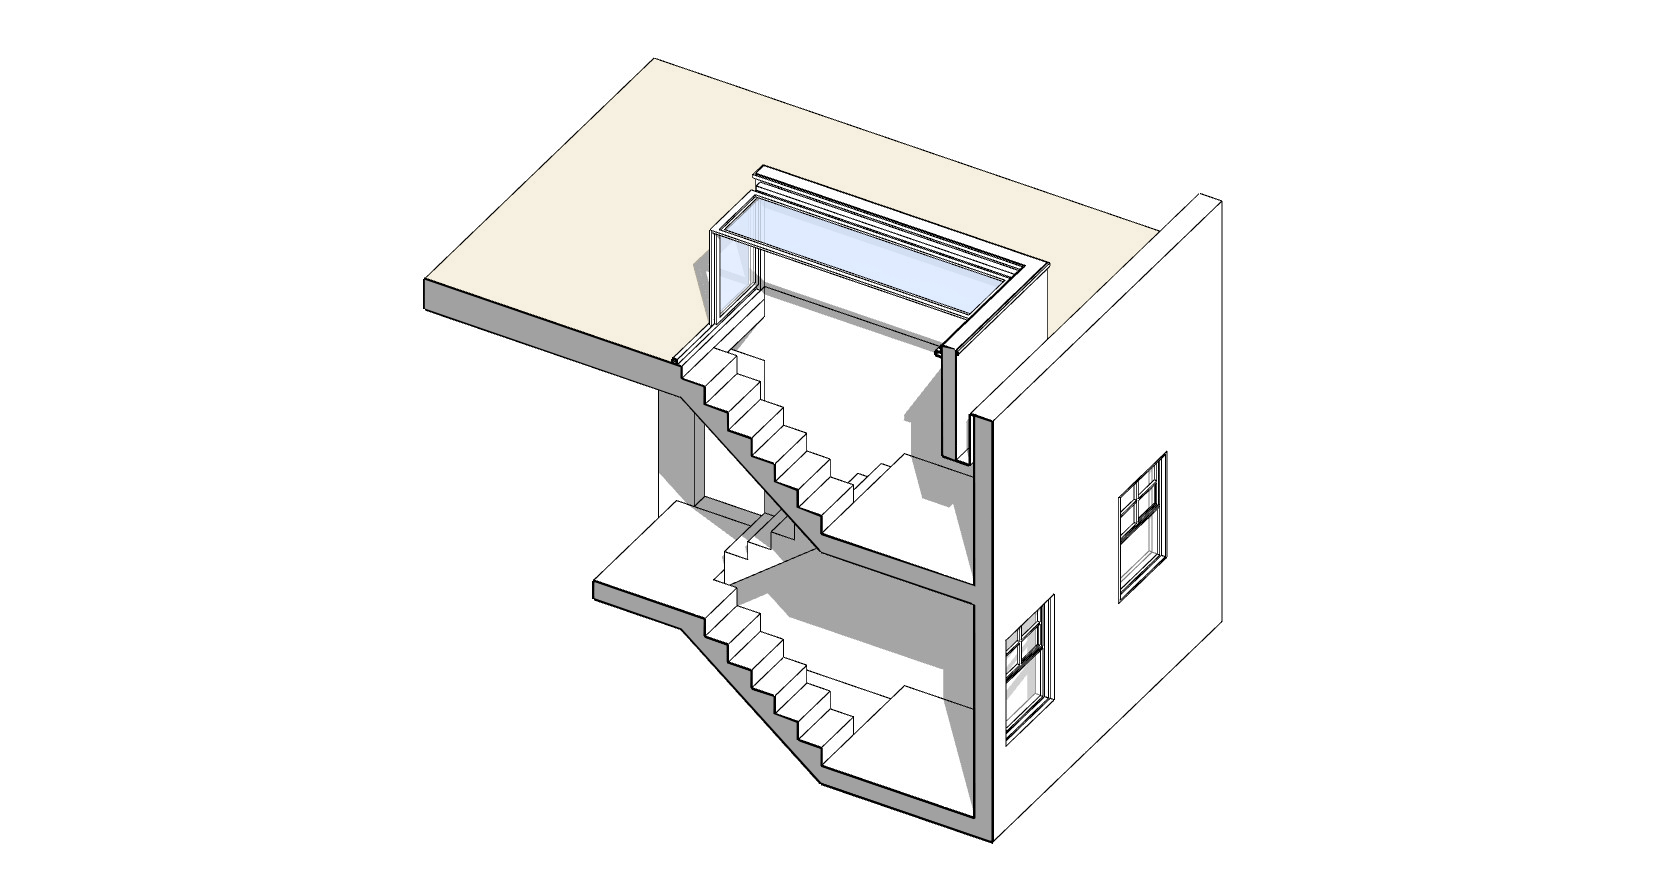 section cut through a 3d model showing access to a roof terrace